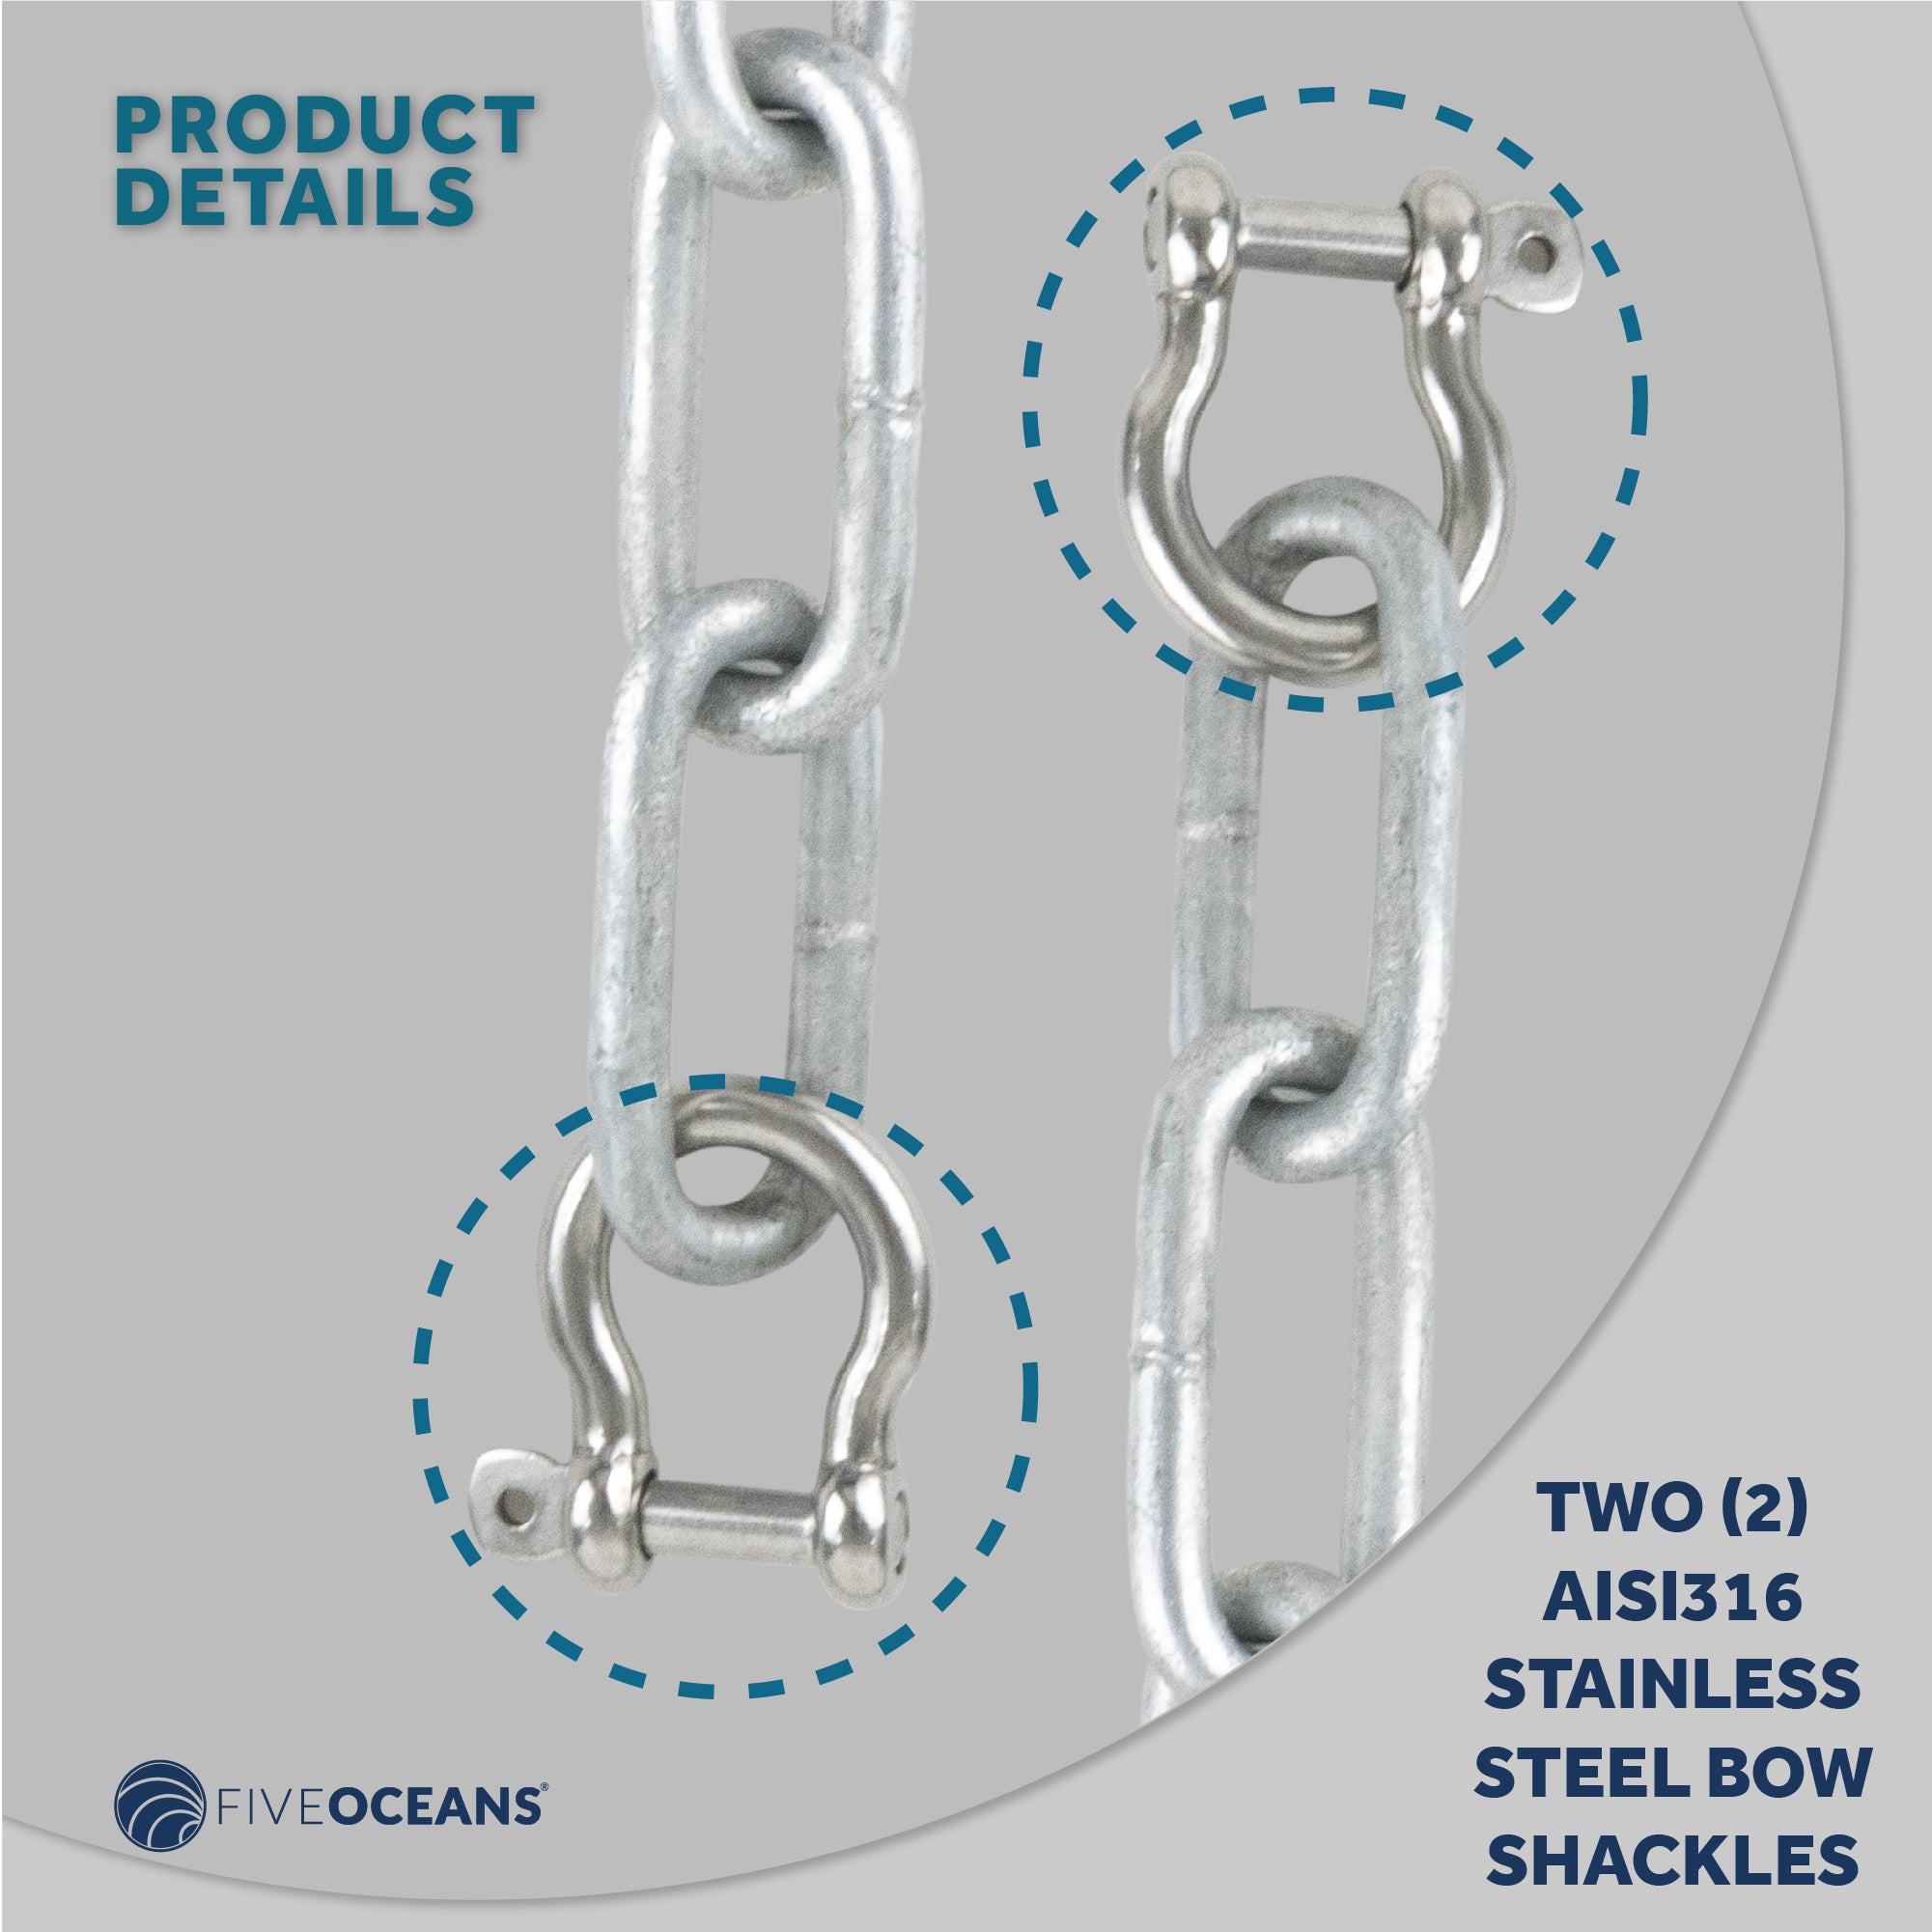 Marine Boat Anchor Lead Chain 1/4 inches x 2 Feet Hot-Dipped Galvanized Steel with 2 AISI316 Stainless Steel 1/4 inches Bow Shackles FO4568-GN2